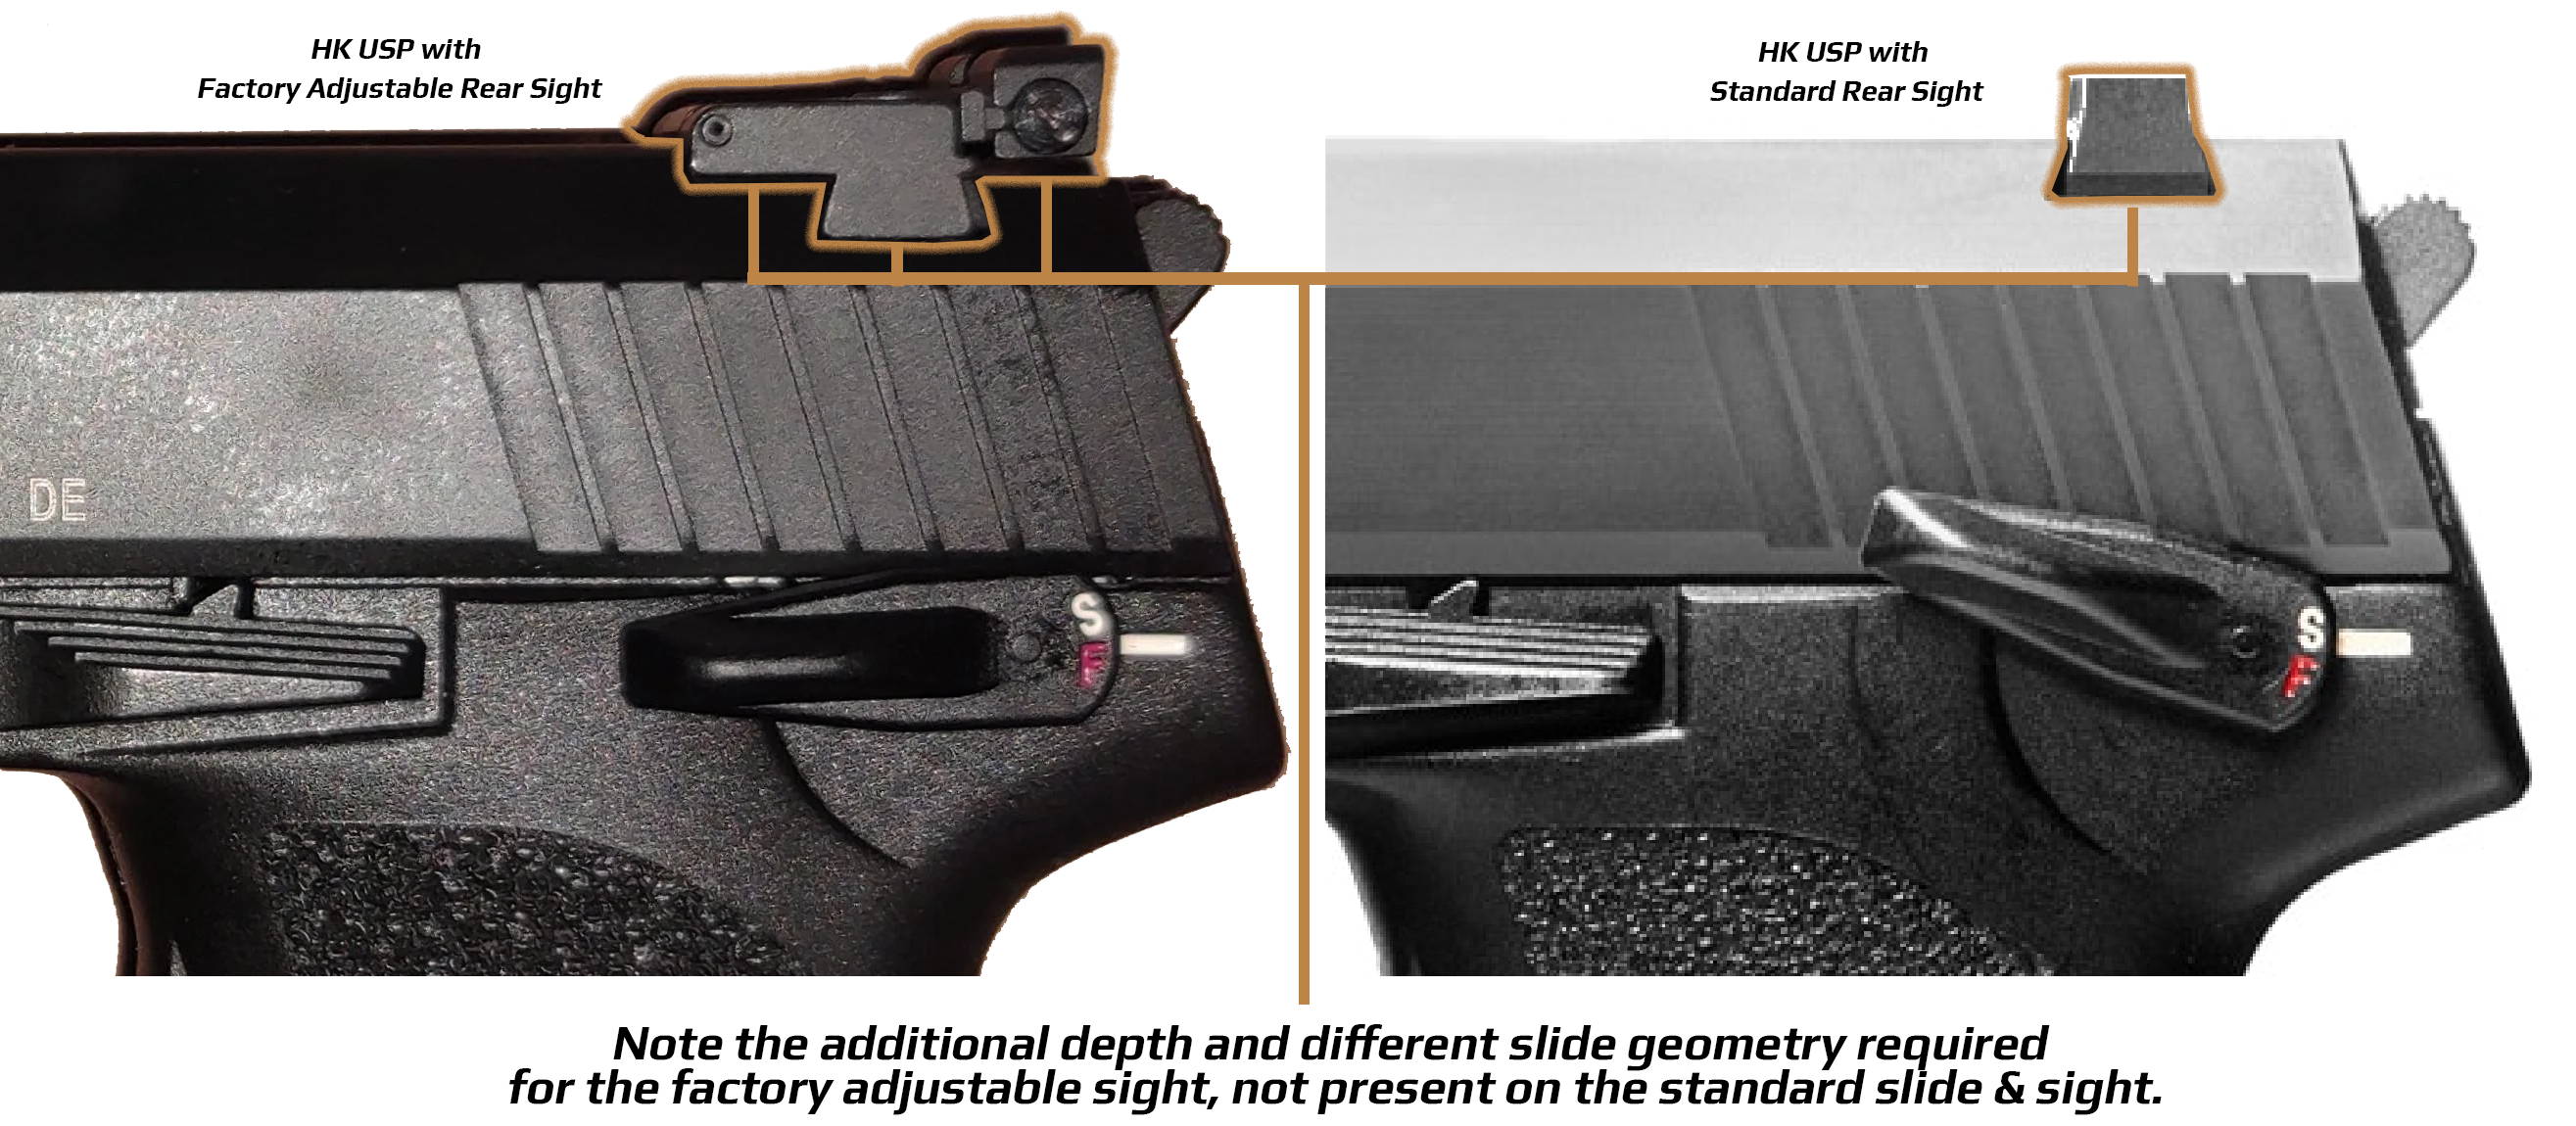 Match Weight - Compensator with Light Rail - Fits HK USP Compact 9